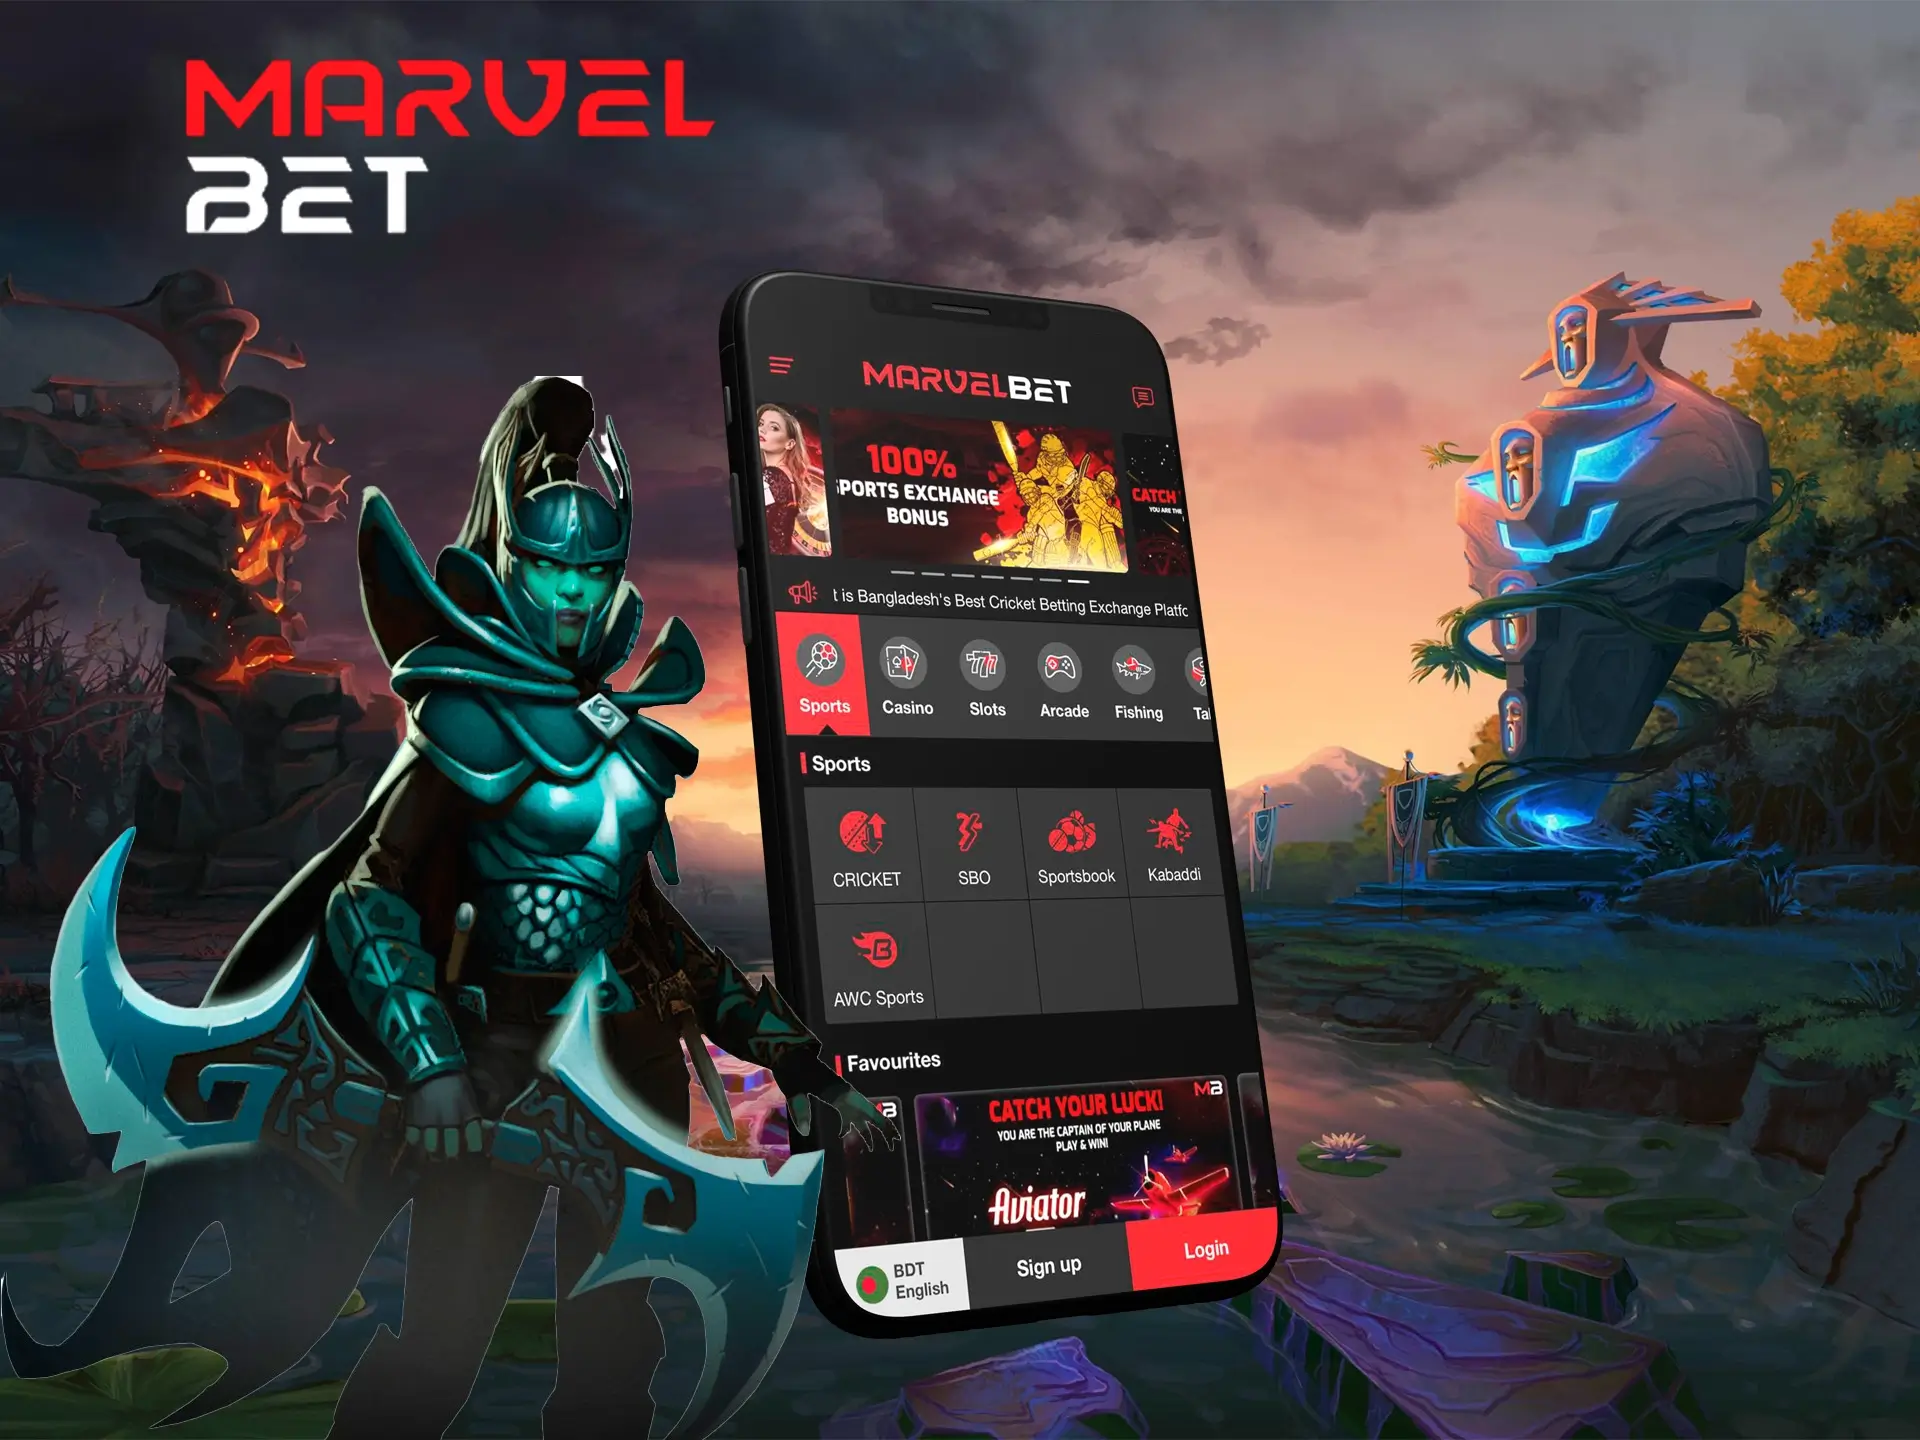 Marvelbet hosts a large number of esports competitions.